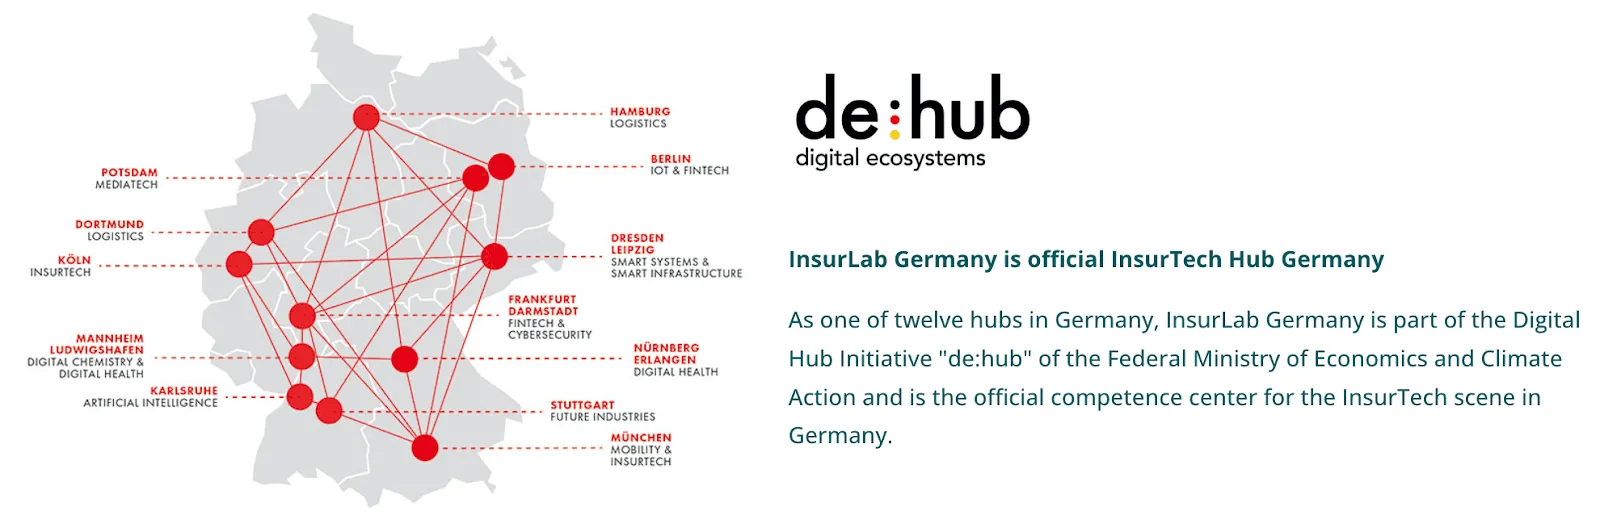 As one of twelve hubs in Germany, InsurLab Germany is part of the Digital Hub Initiative "de:hub" of the Federal Ministry of Economics and Climate Action and is the official competence center for the InsurTech scene in Germany.